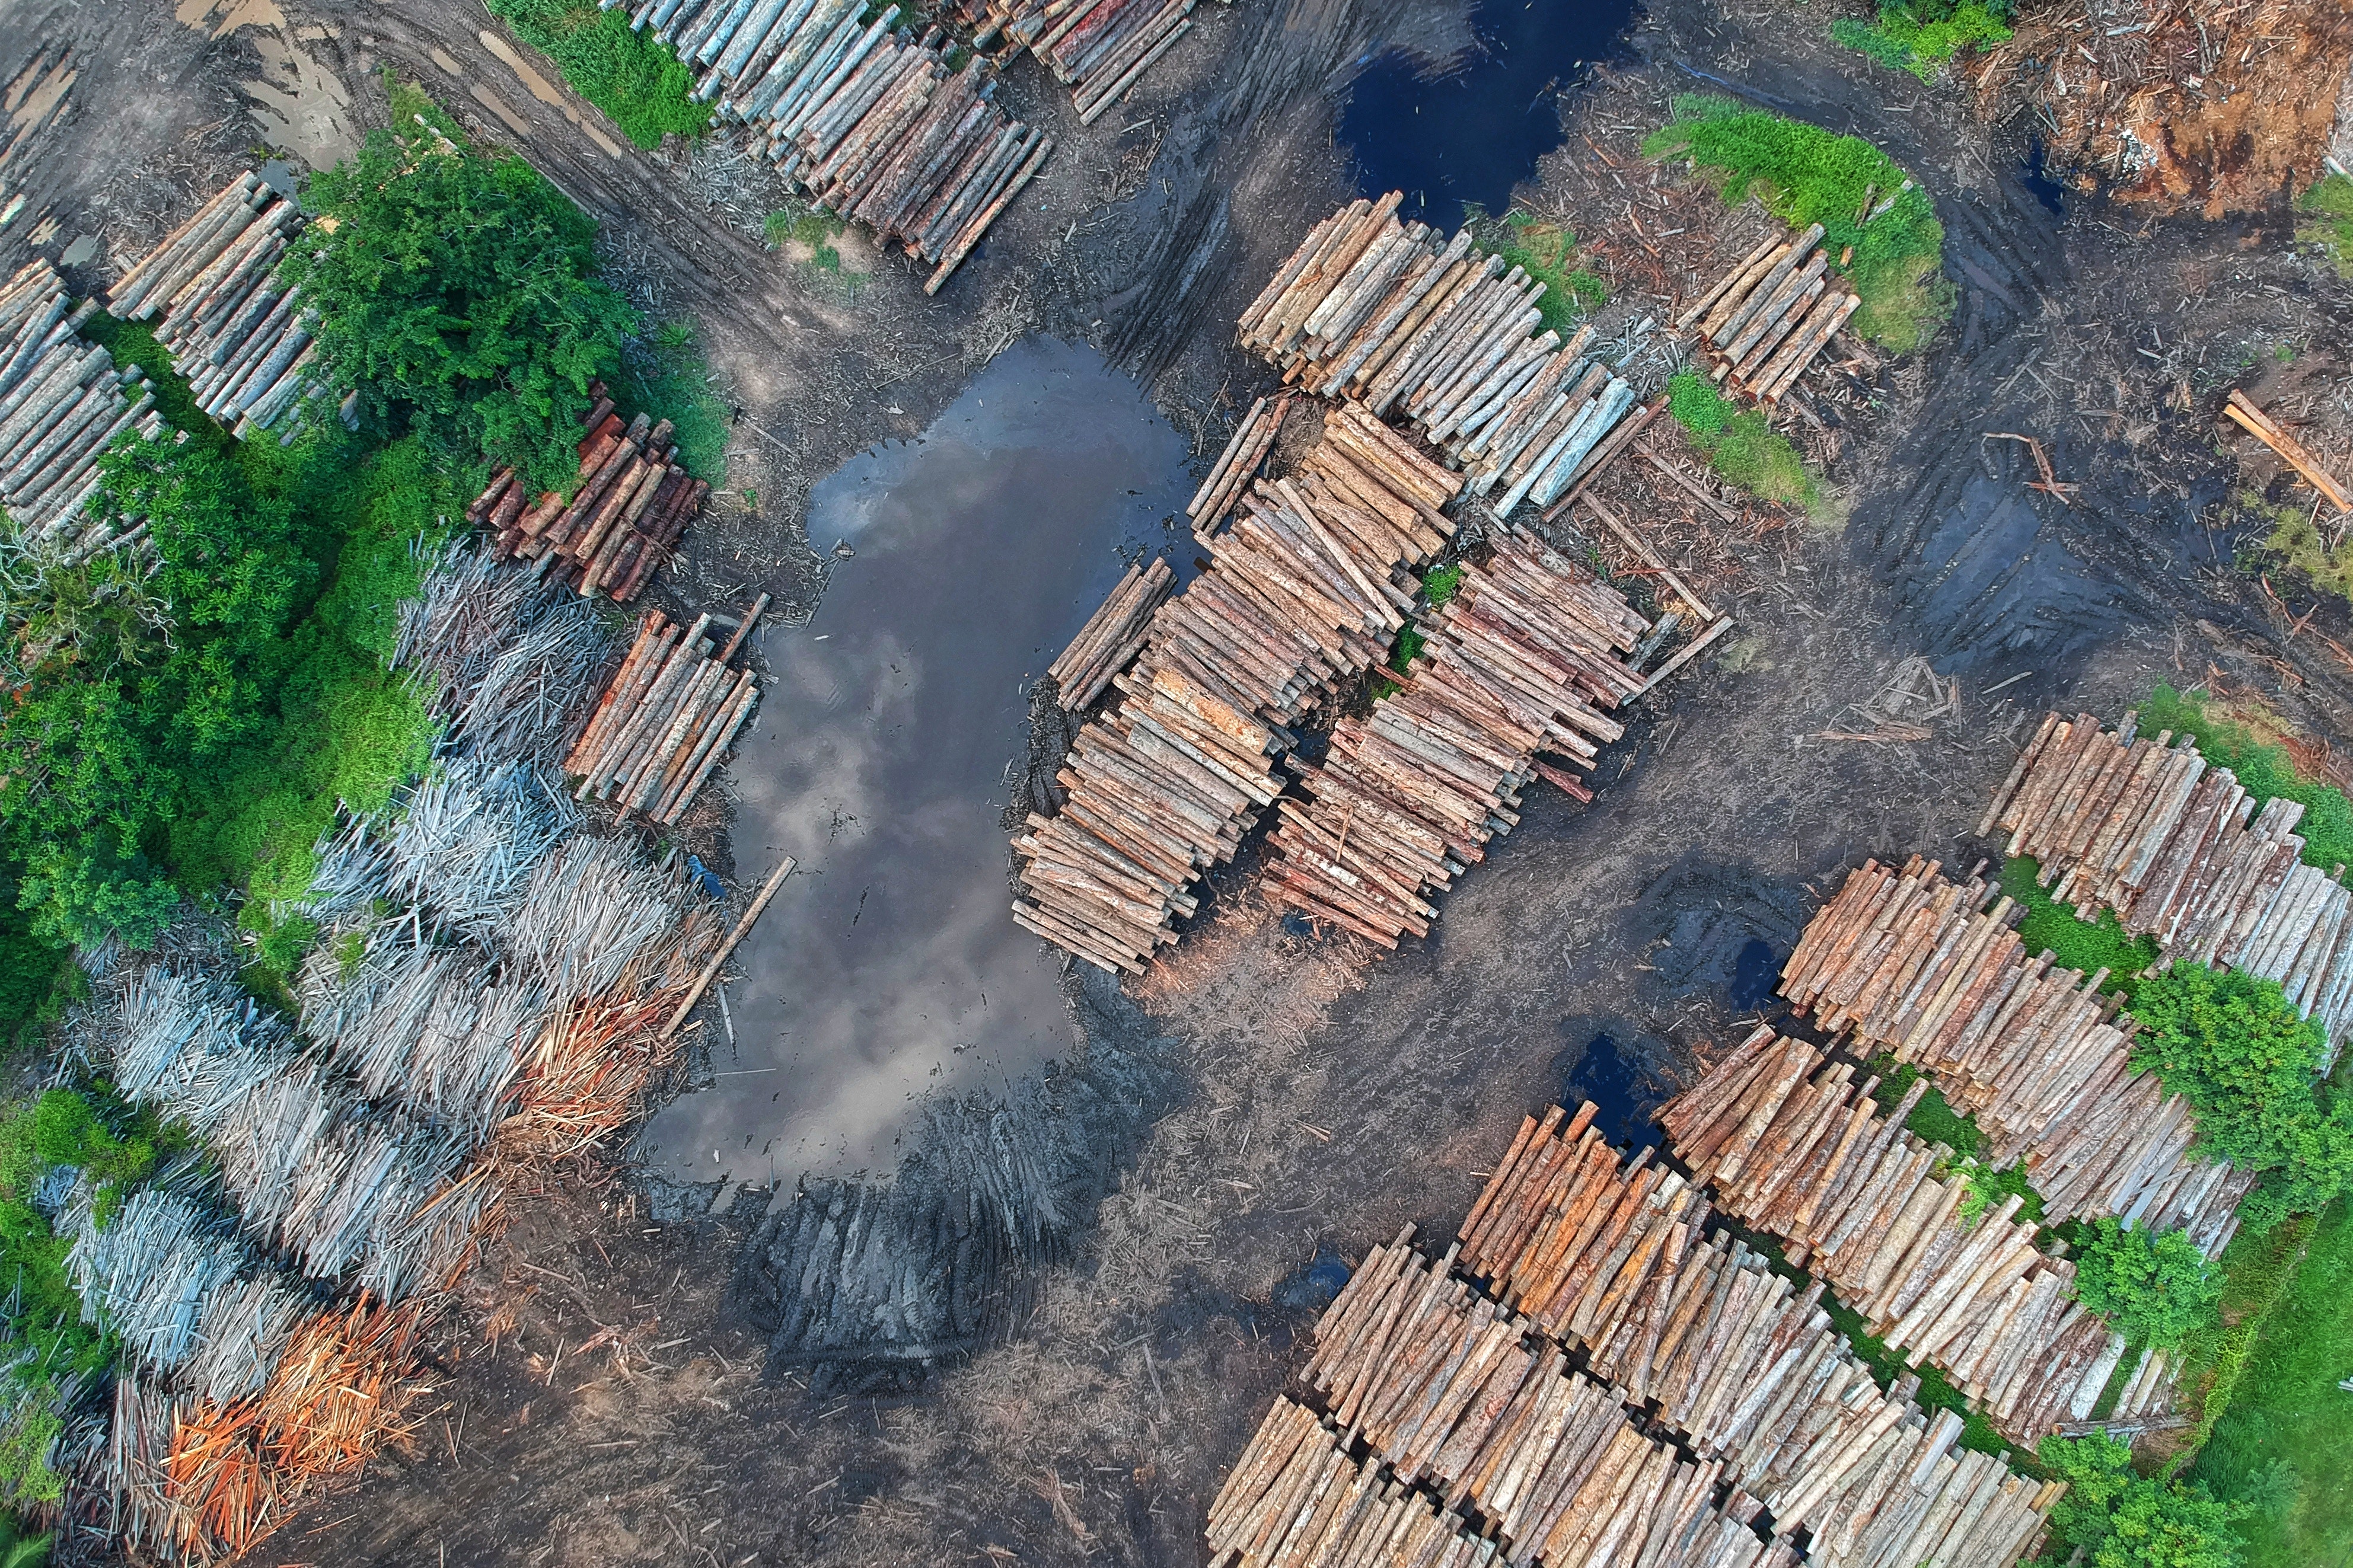 Illegal mining “epidemic” in the Amazon could be combated with high-tech mapping